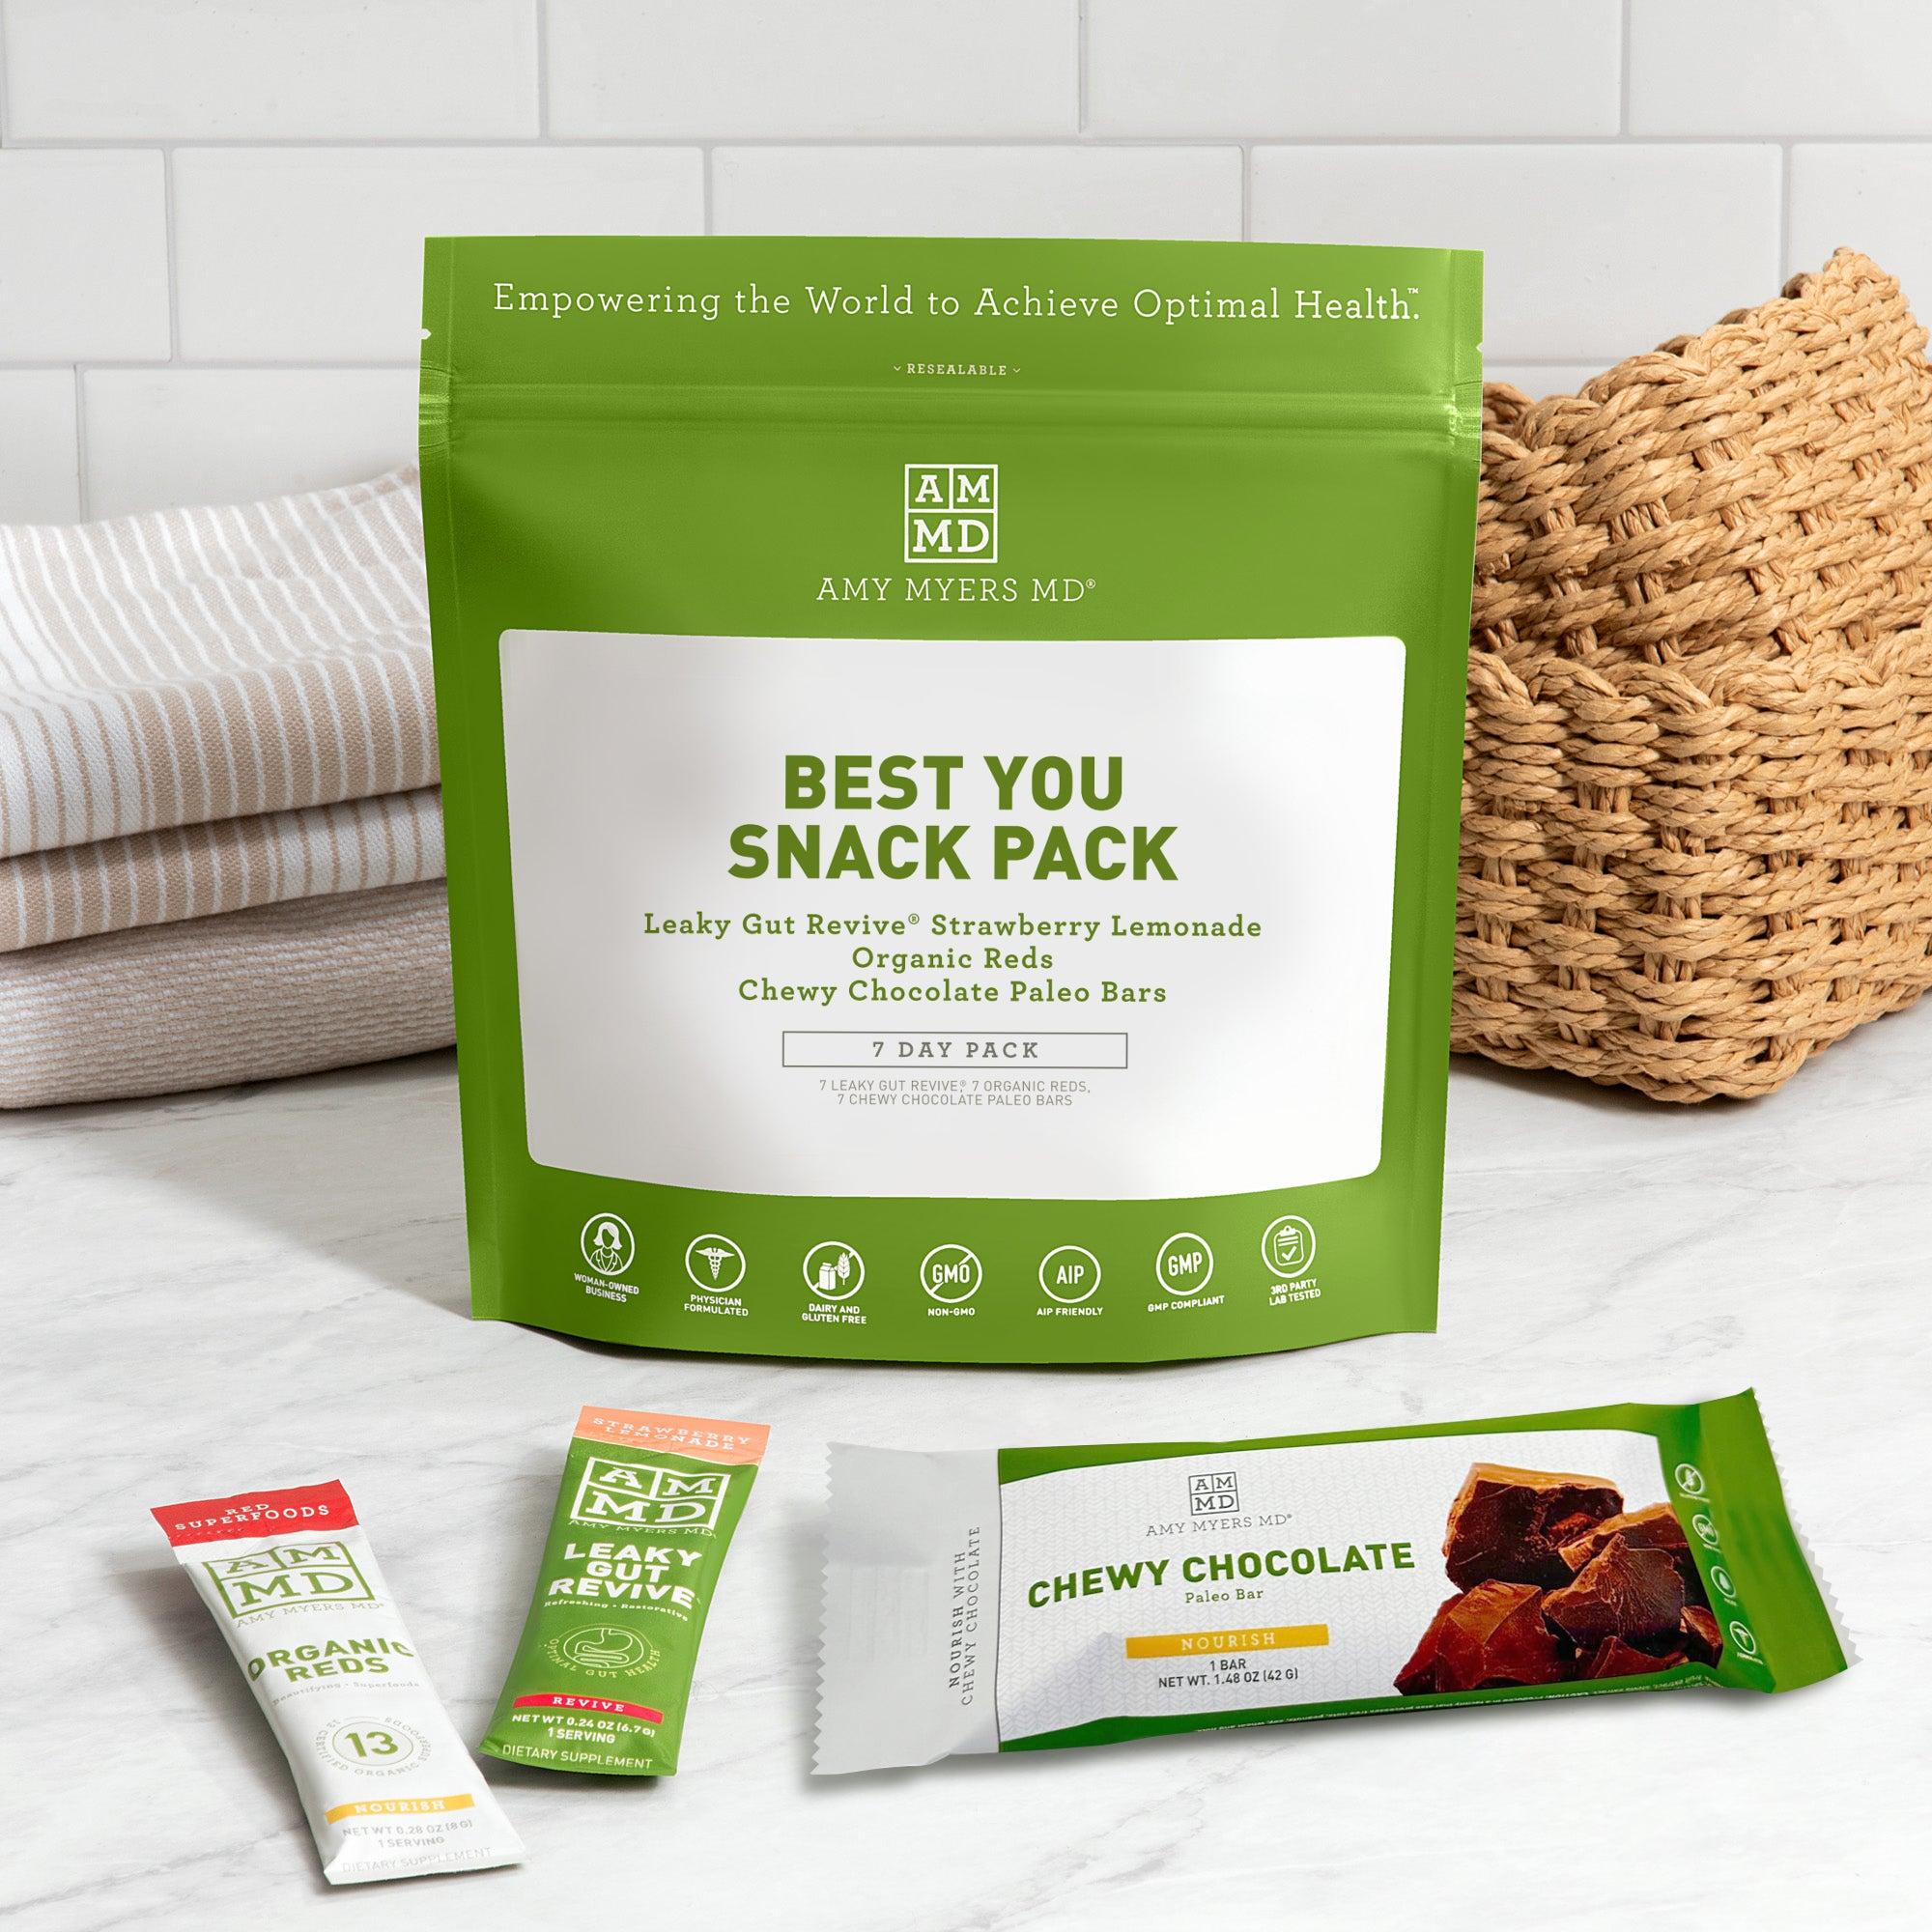 Best You 7 Day Snack Pack - Organic Reds, Leaky Gut Revive, Chewy Chocolate Paleo Bar - Amy Myers MD®